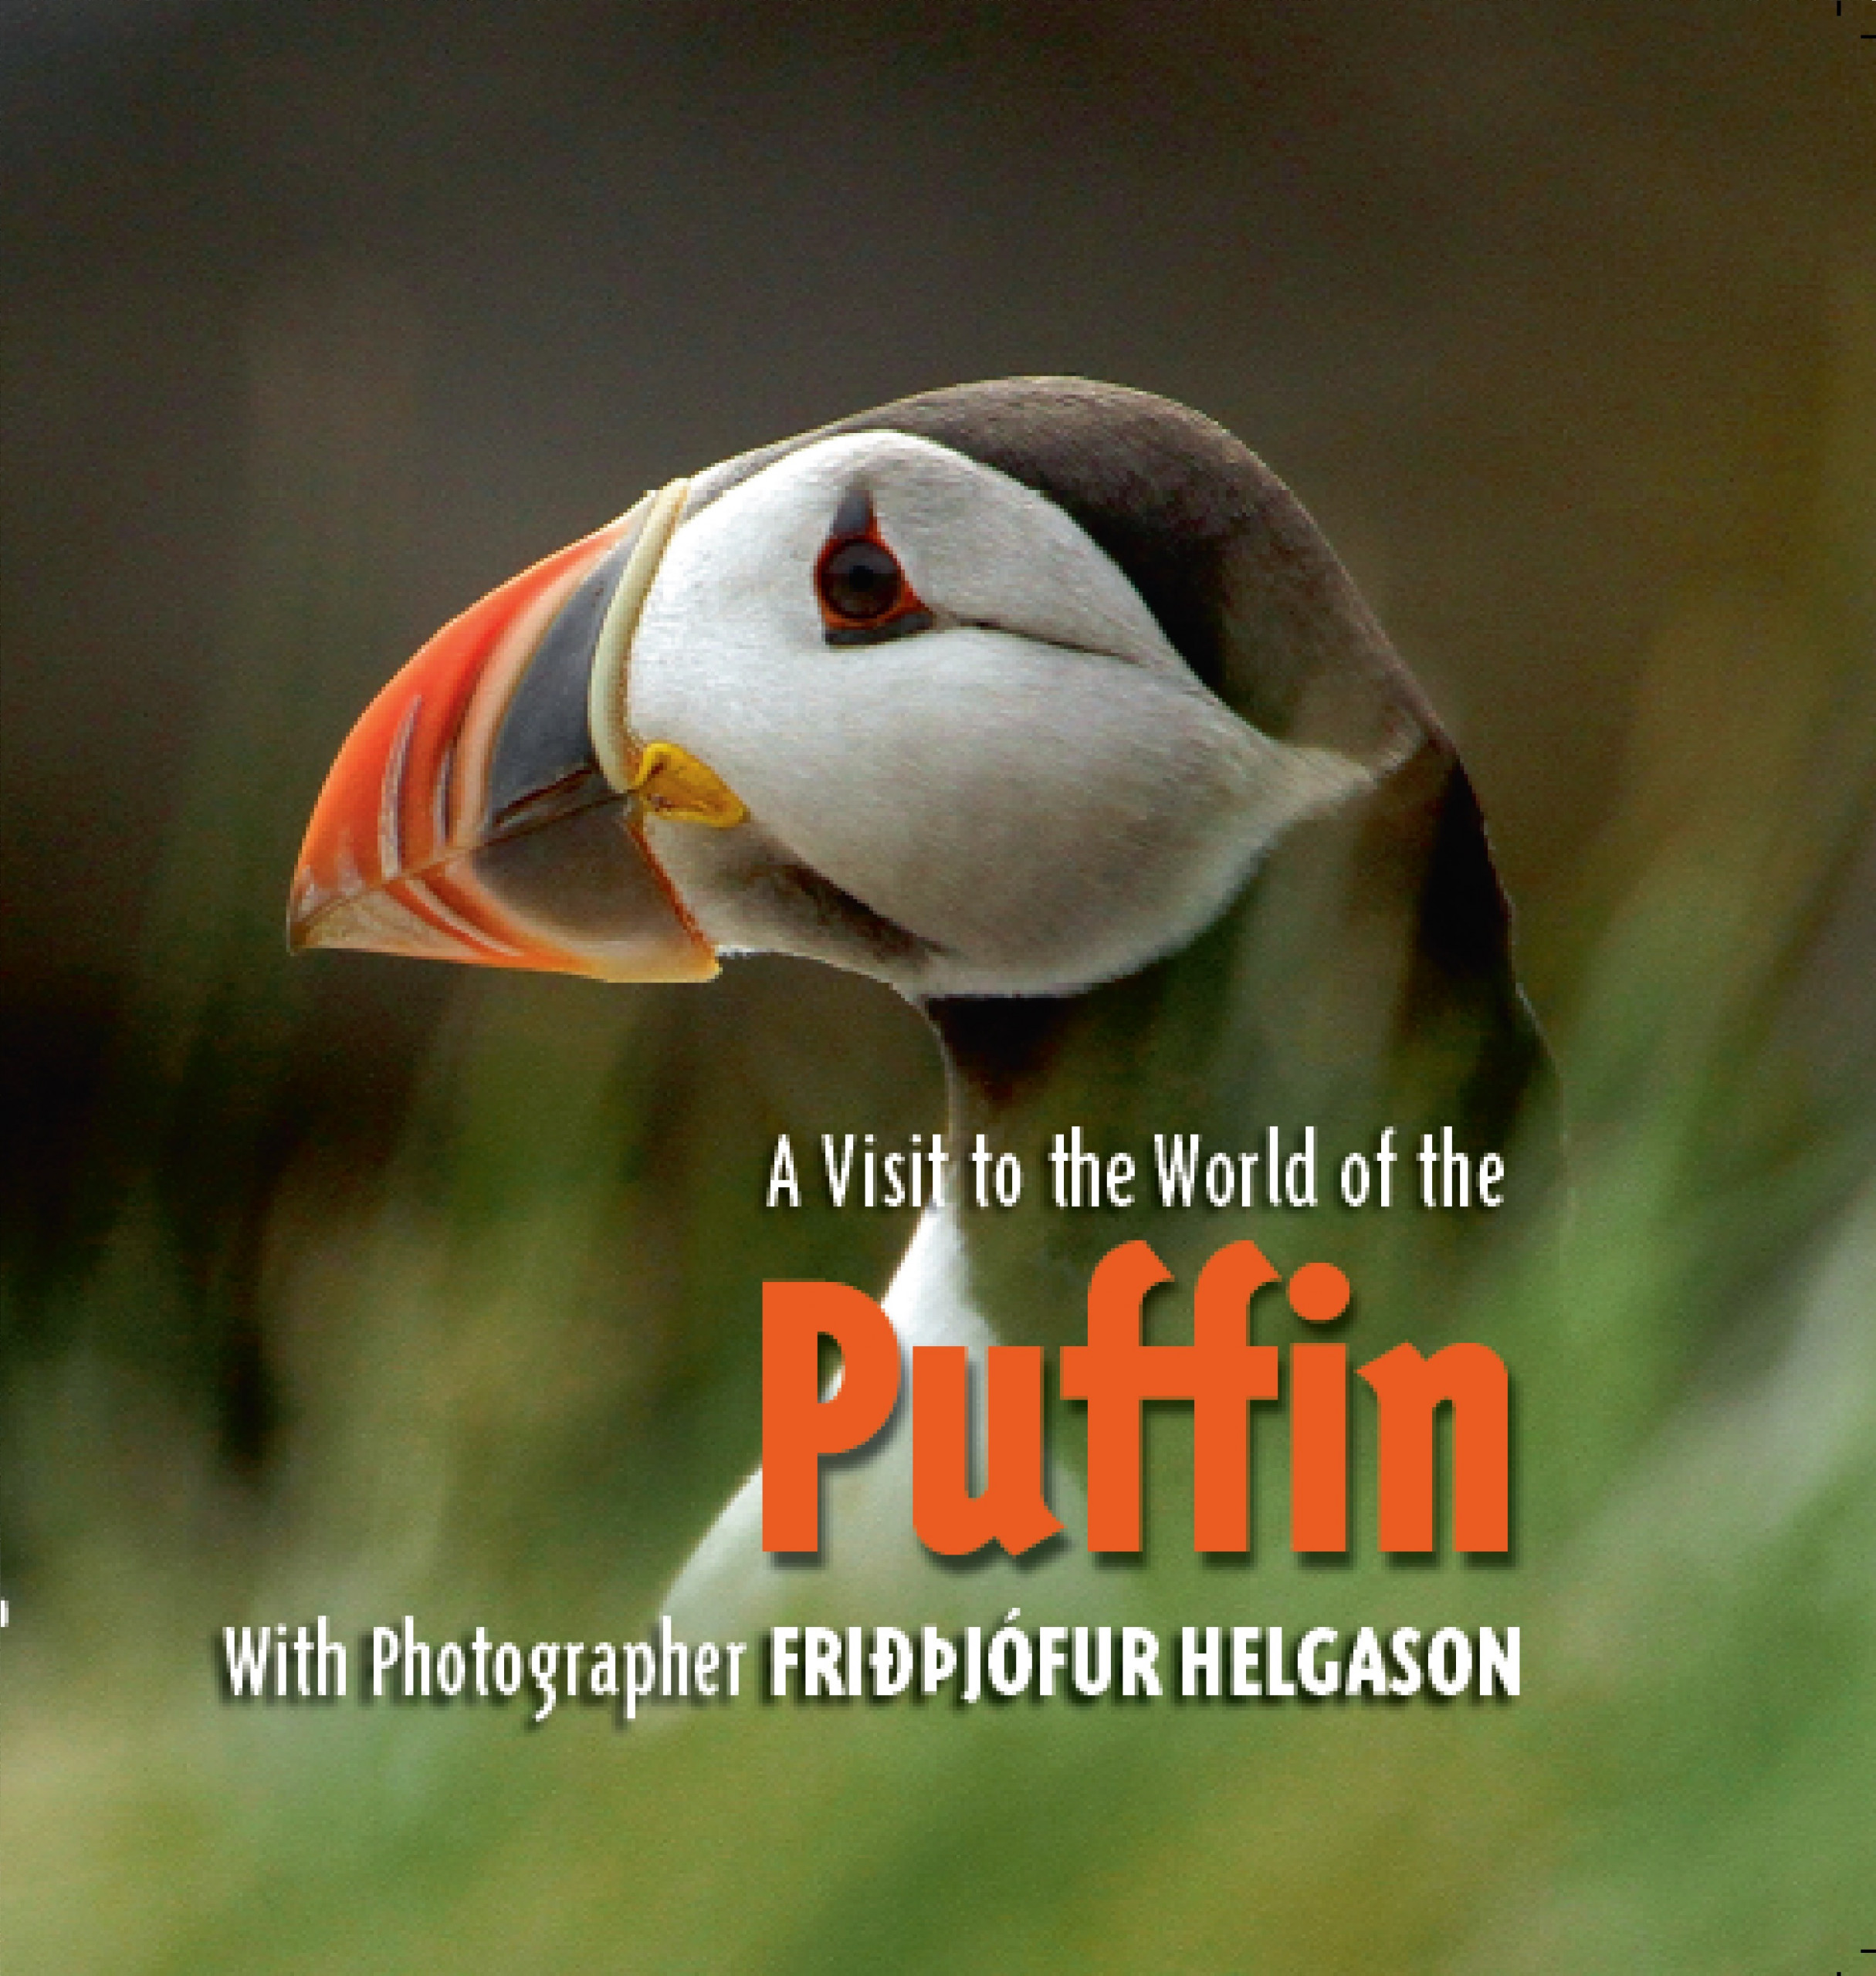 A Visit to the World of the Puffin